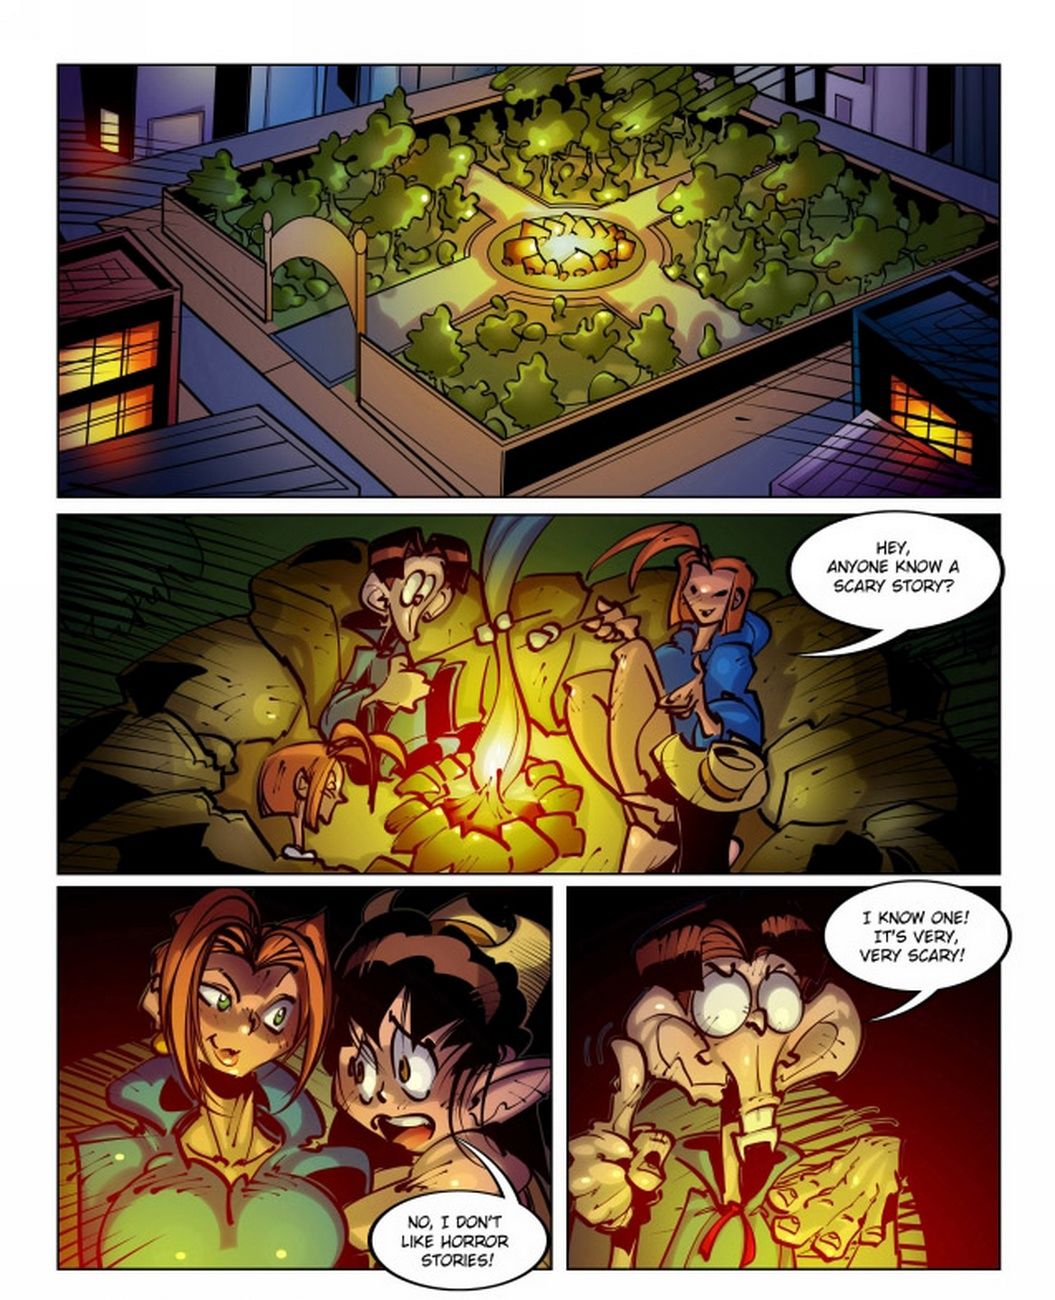 Lilly Heroine 18 - Halloween Stories page 2